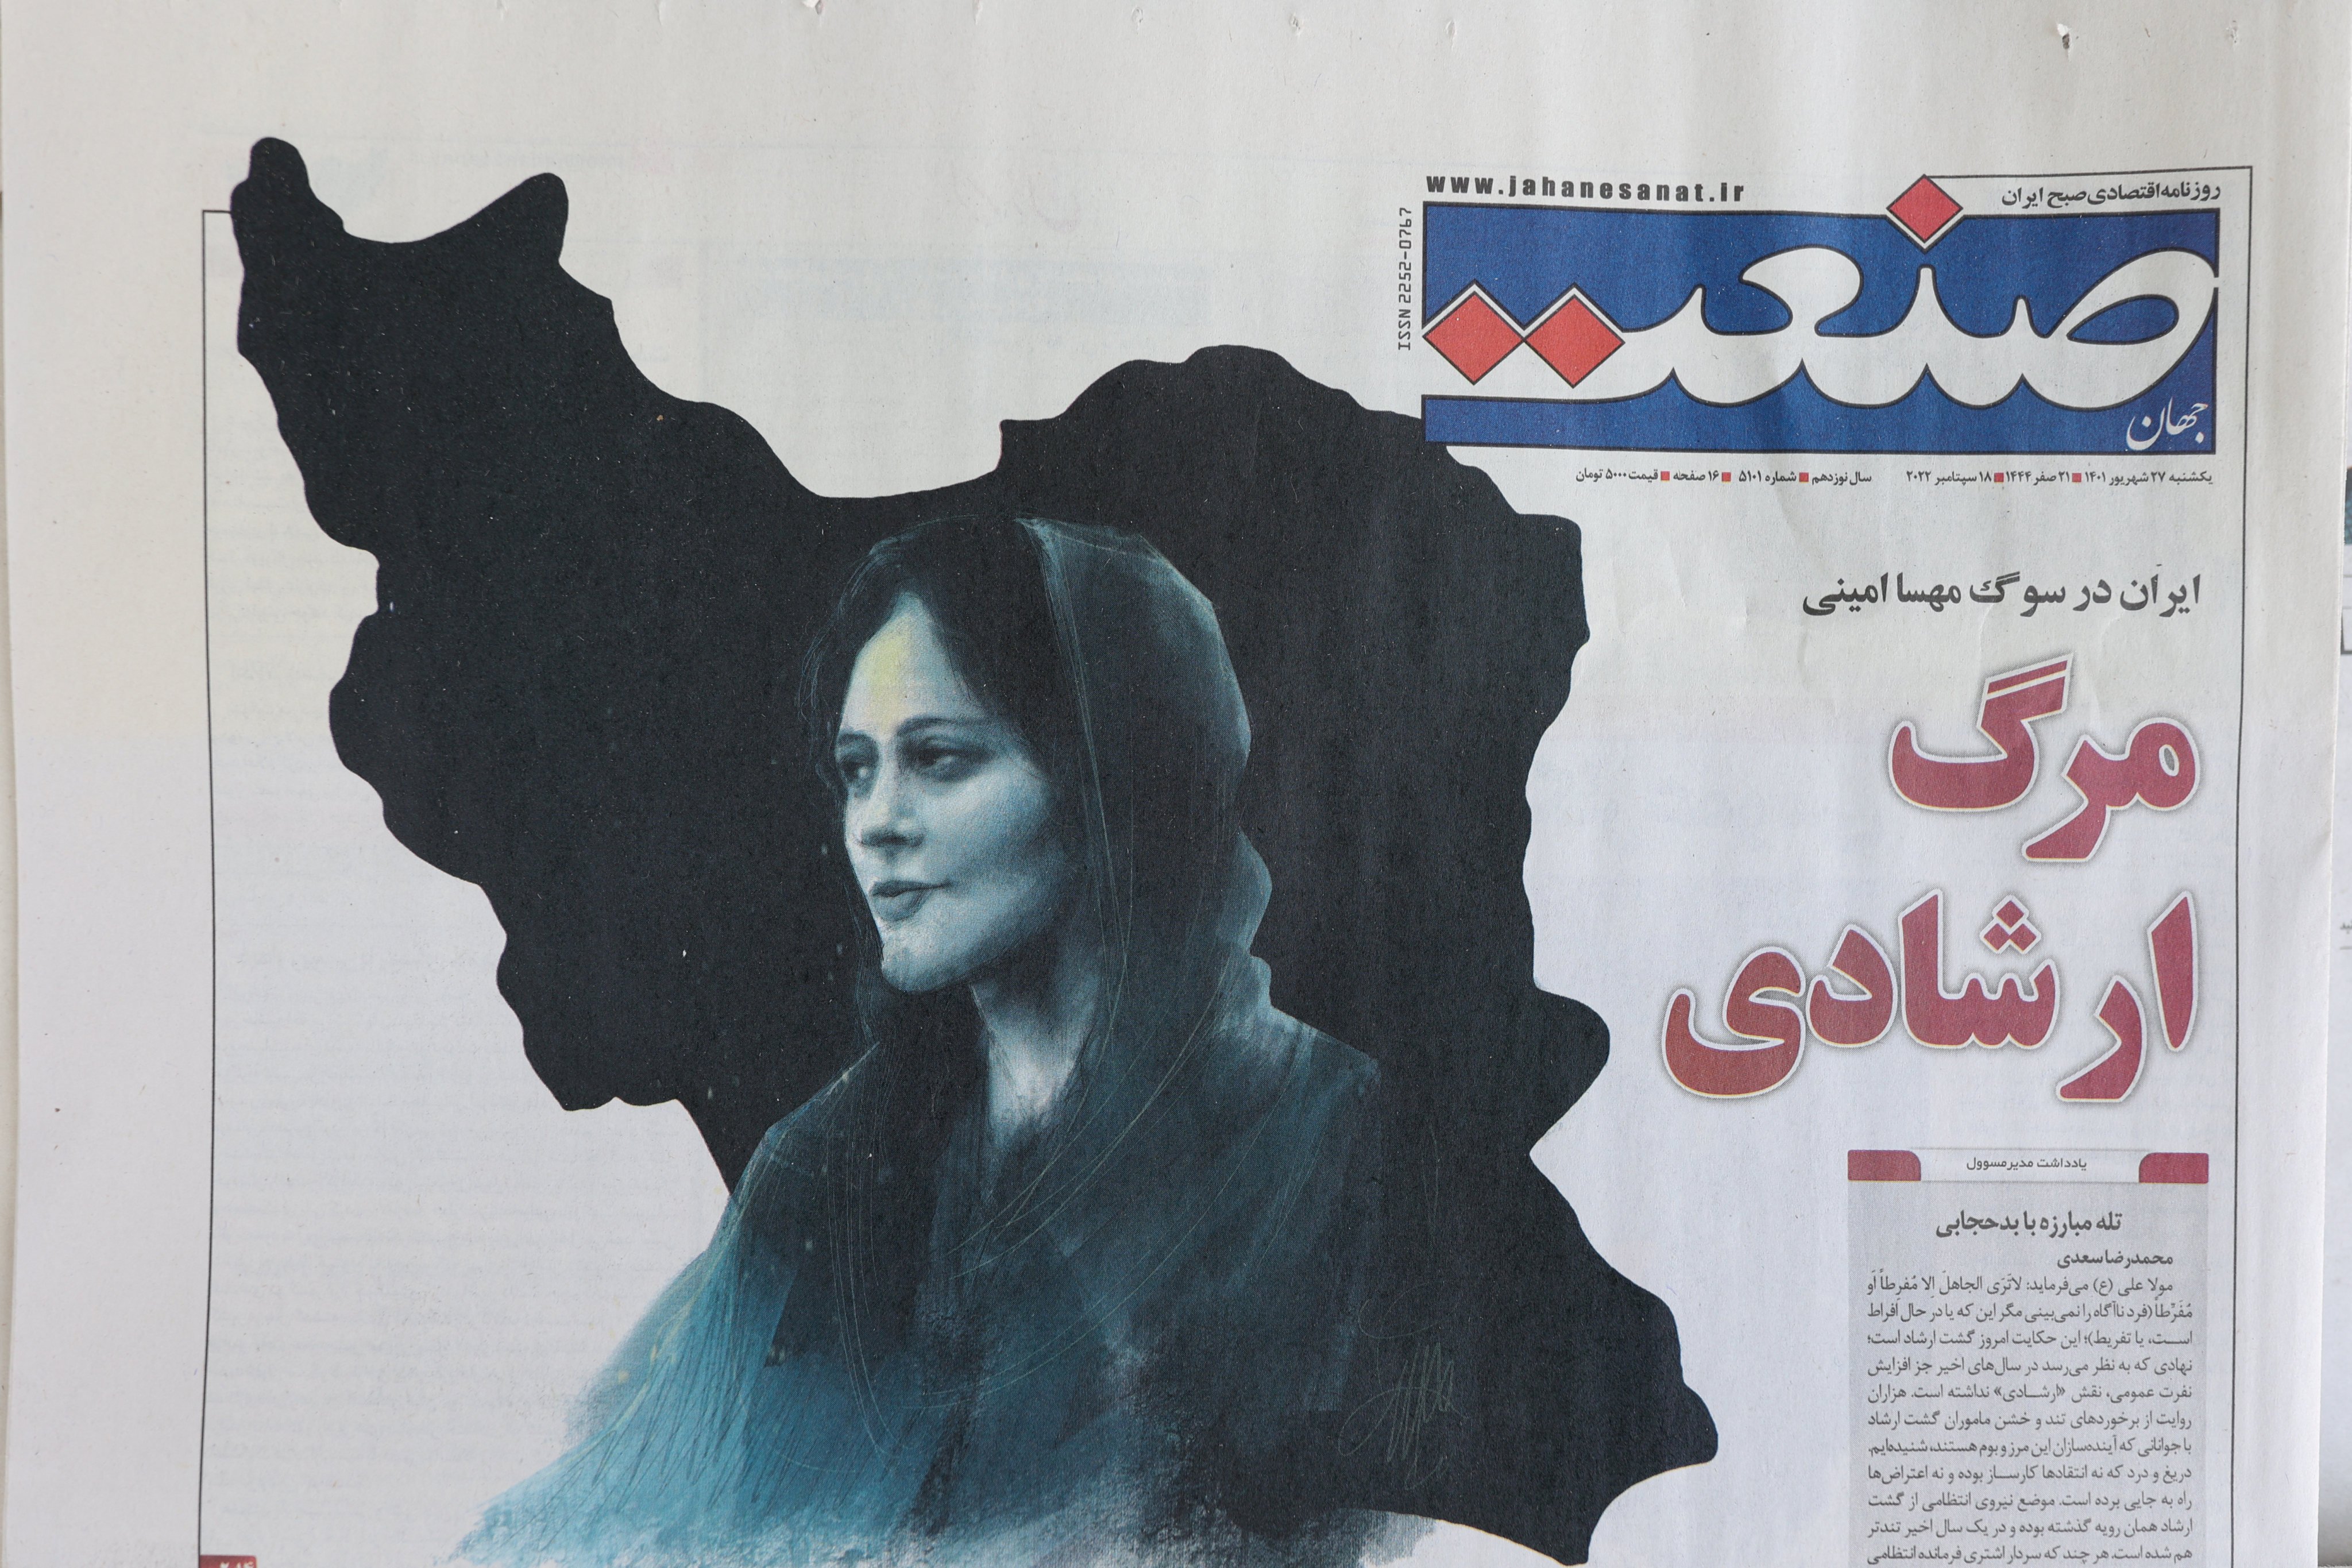 A newspaper with a cover picture of Mahsa Amini, the woman who died after being arrested by the Islamic republic’s ‘morality police’. Photo: West Asia News Agency via Reuters